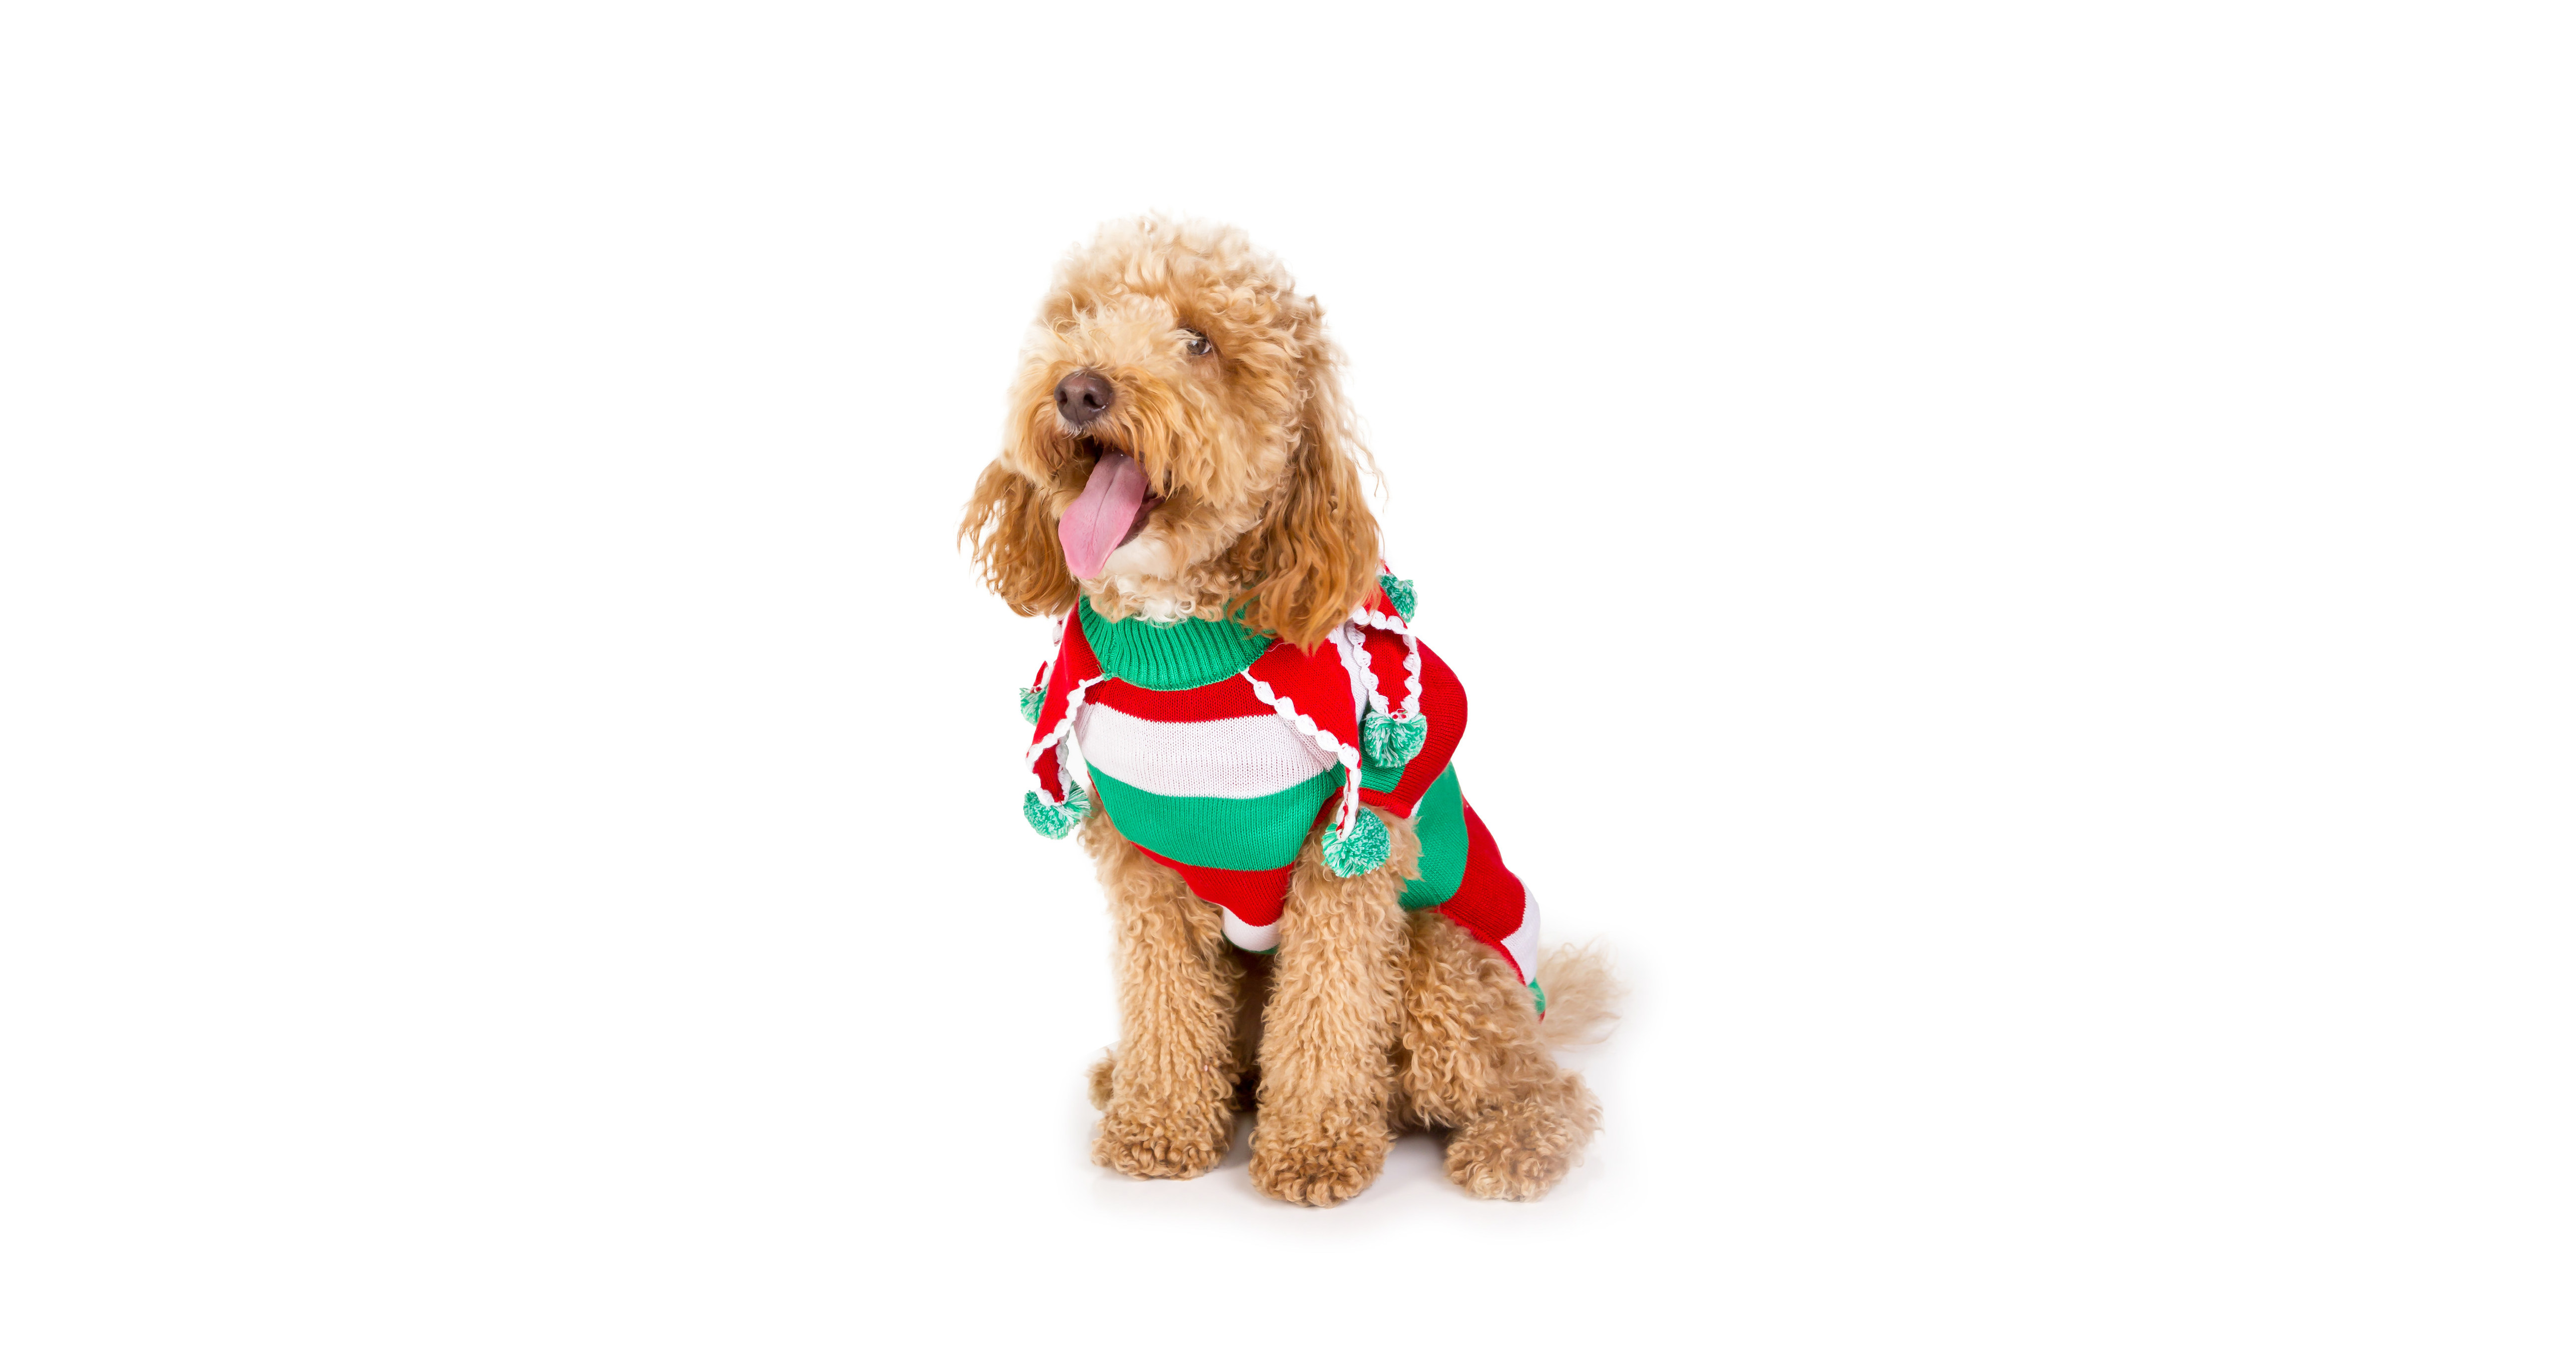 Christmas Present Dog Sweater - Fun Christmas Themed Dog Sweater by Tipsy Elves